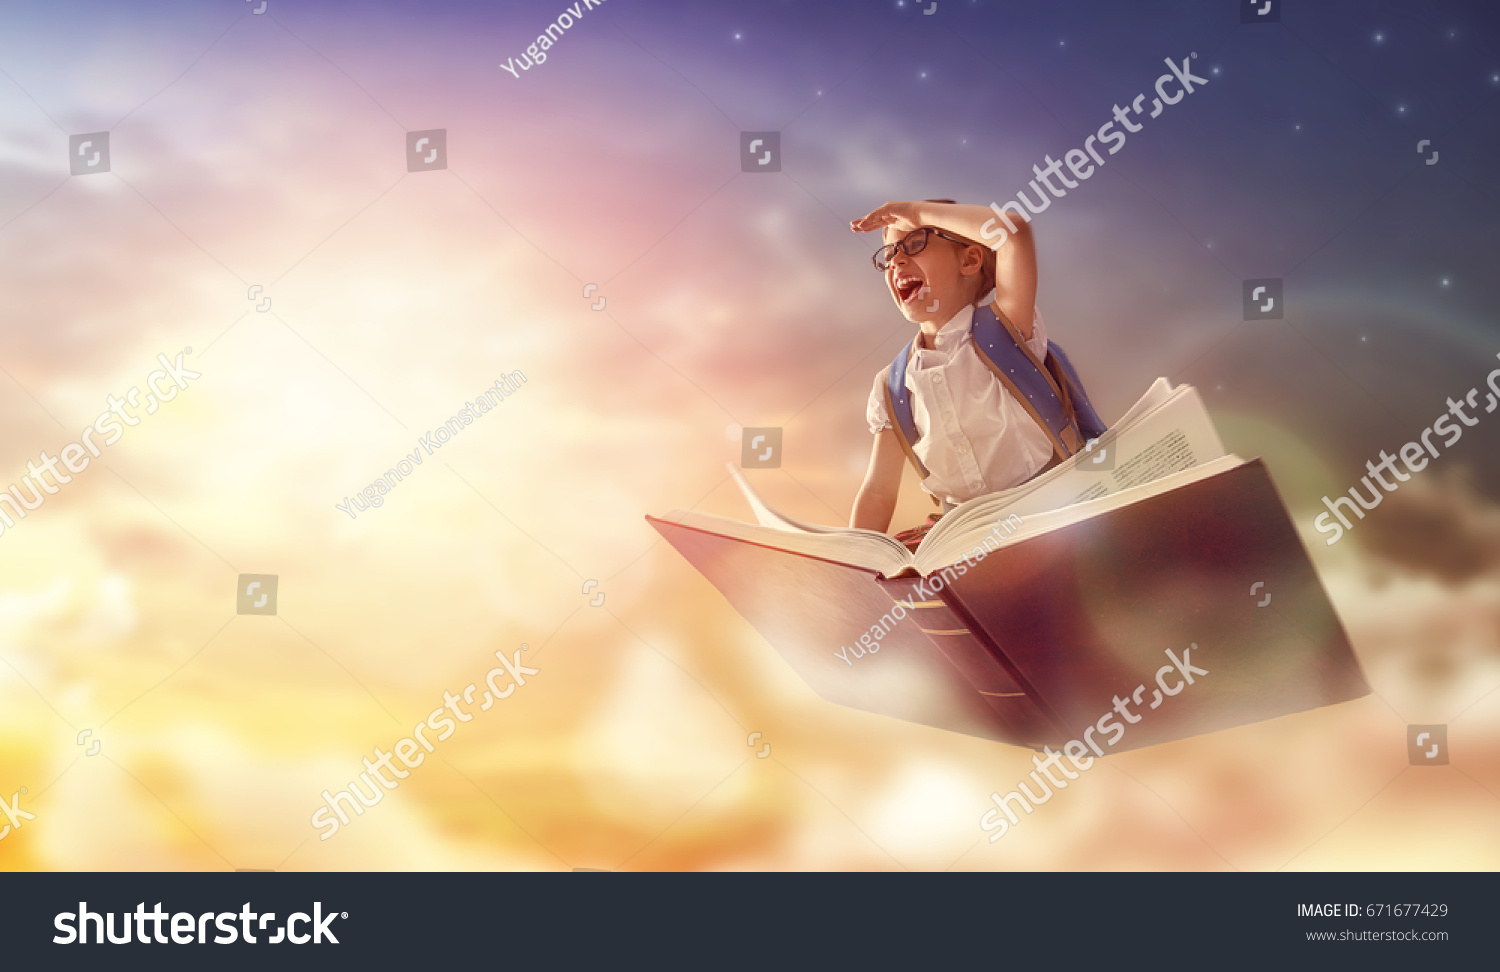 Back to school! Happy cute industrious child flying on the book on background of sunset sky. Concept of education and reading. The development of the imagination. #671677429